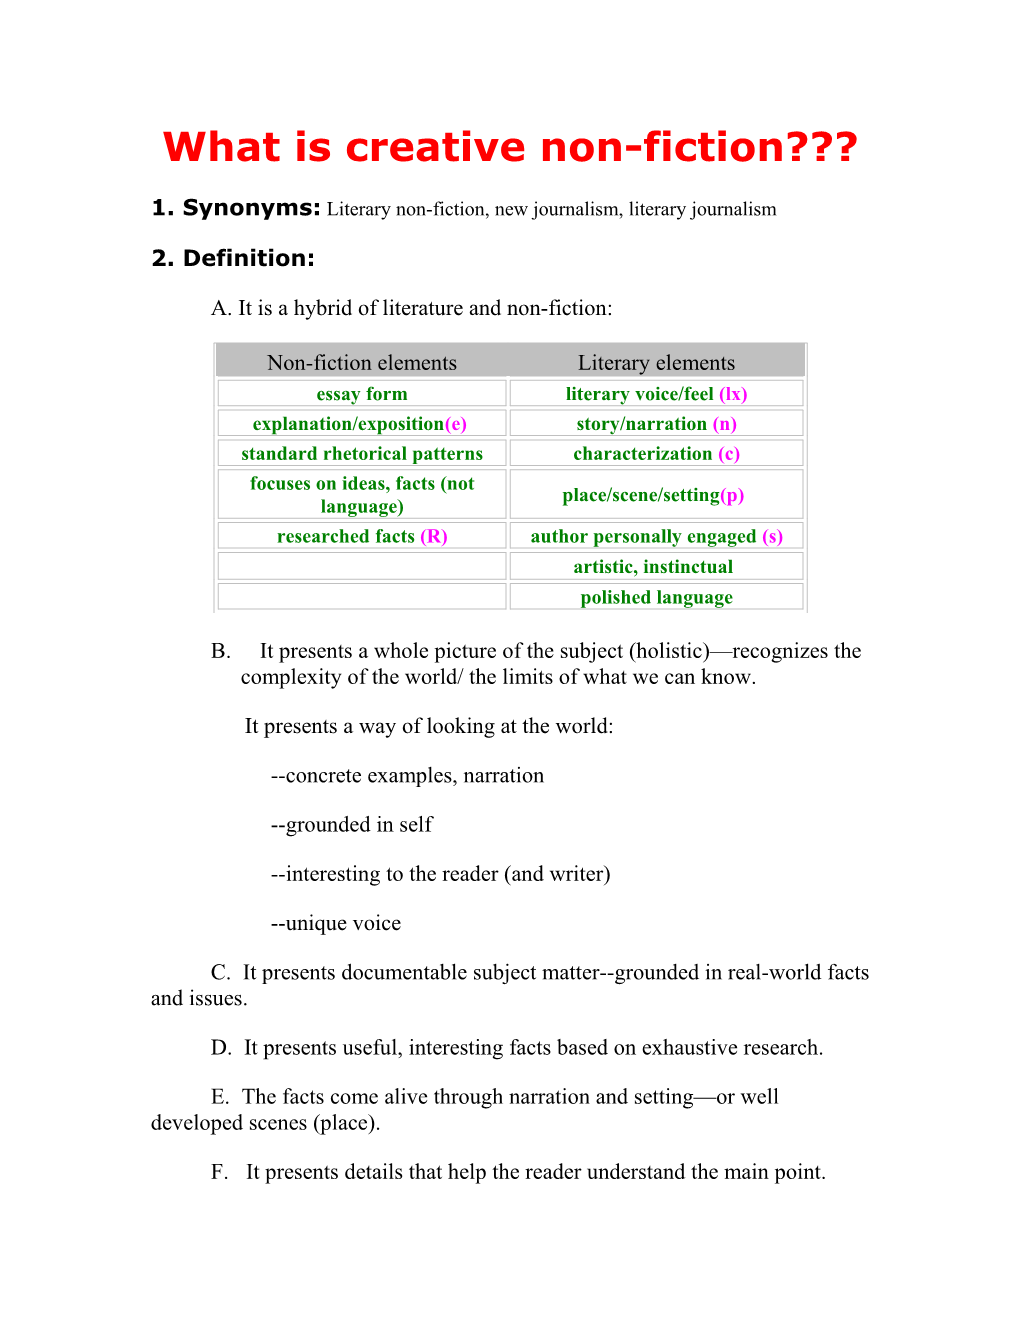 What Is Creative Non-Fiction